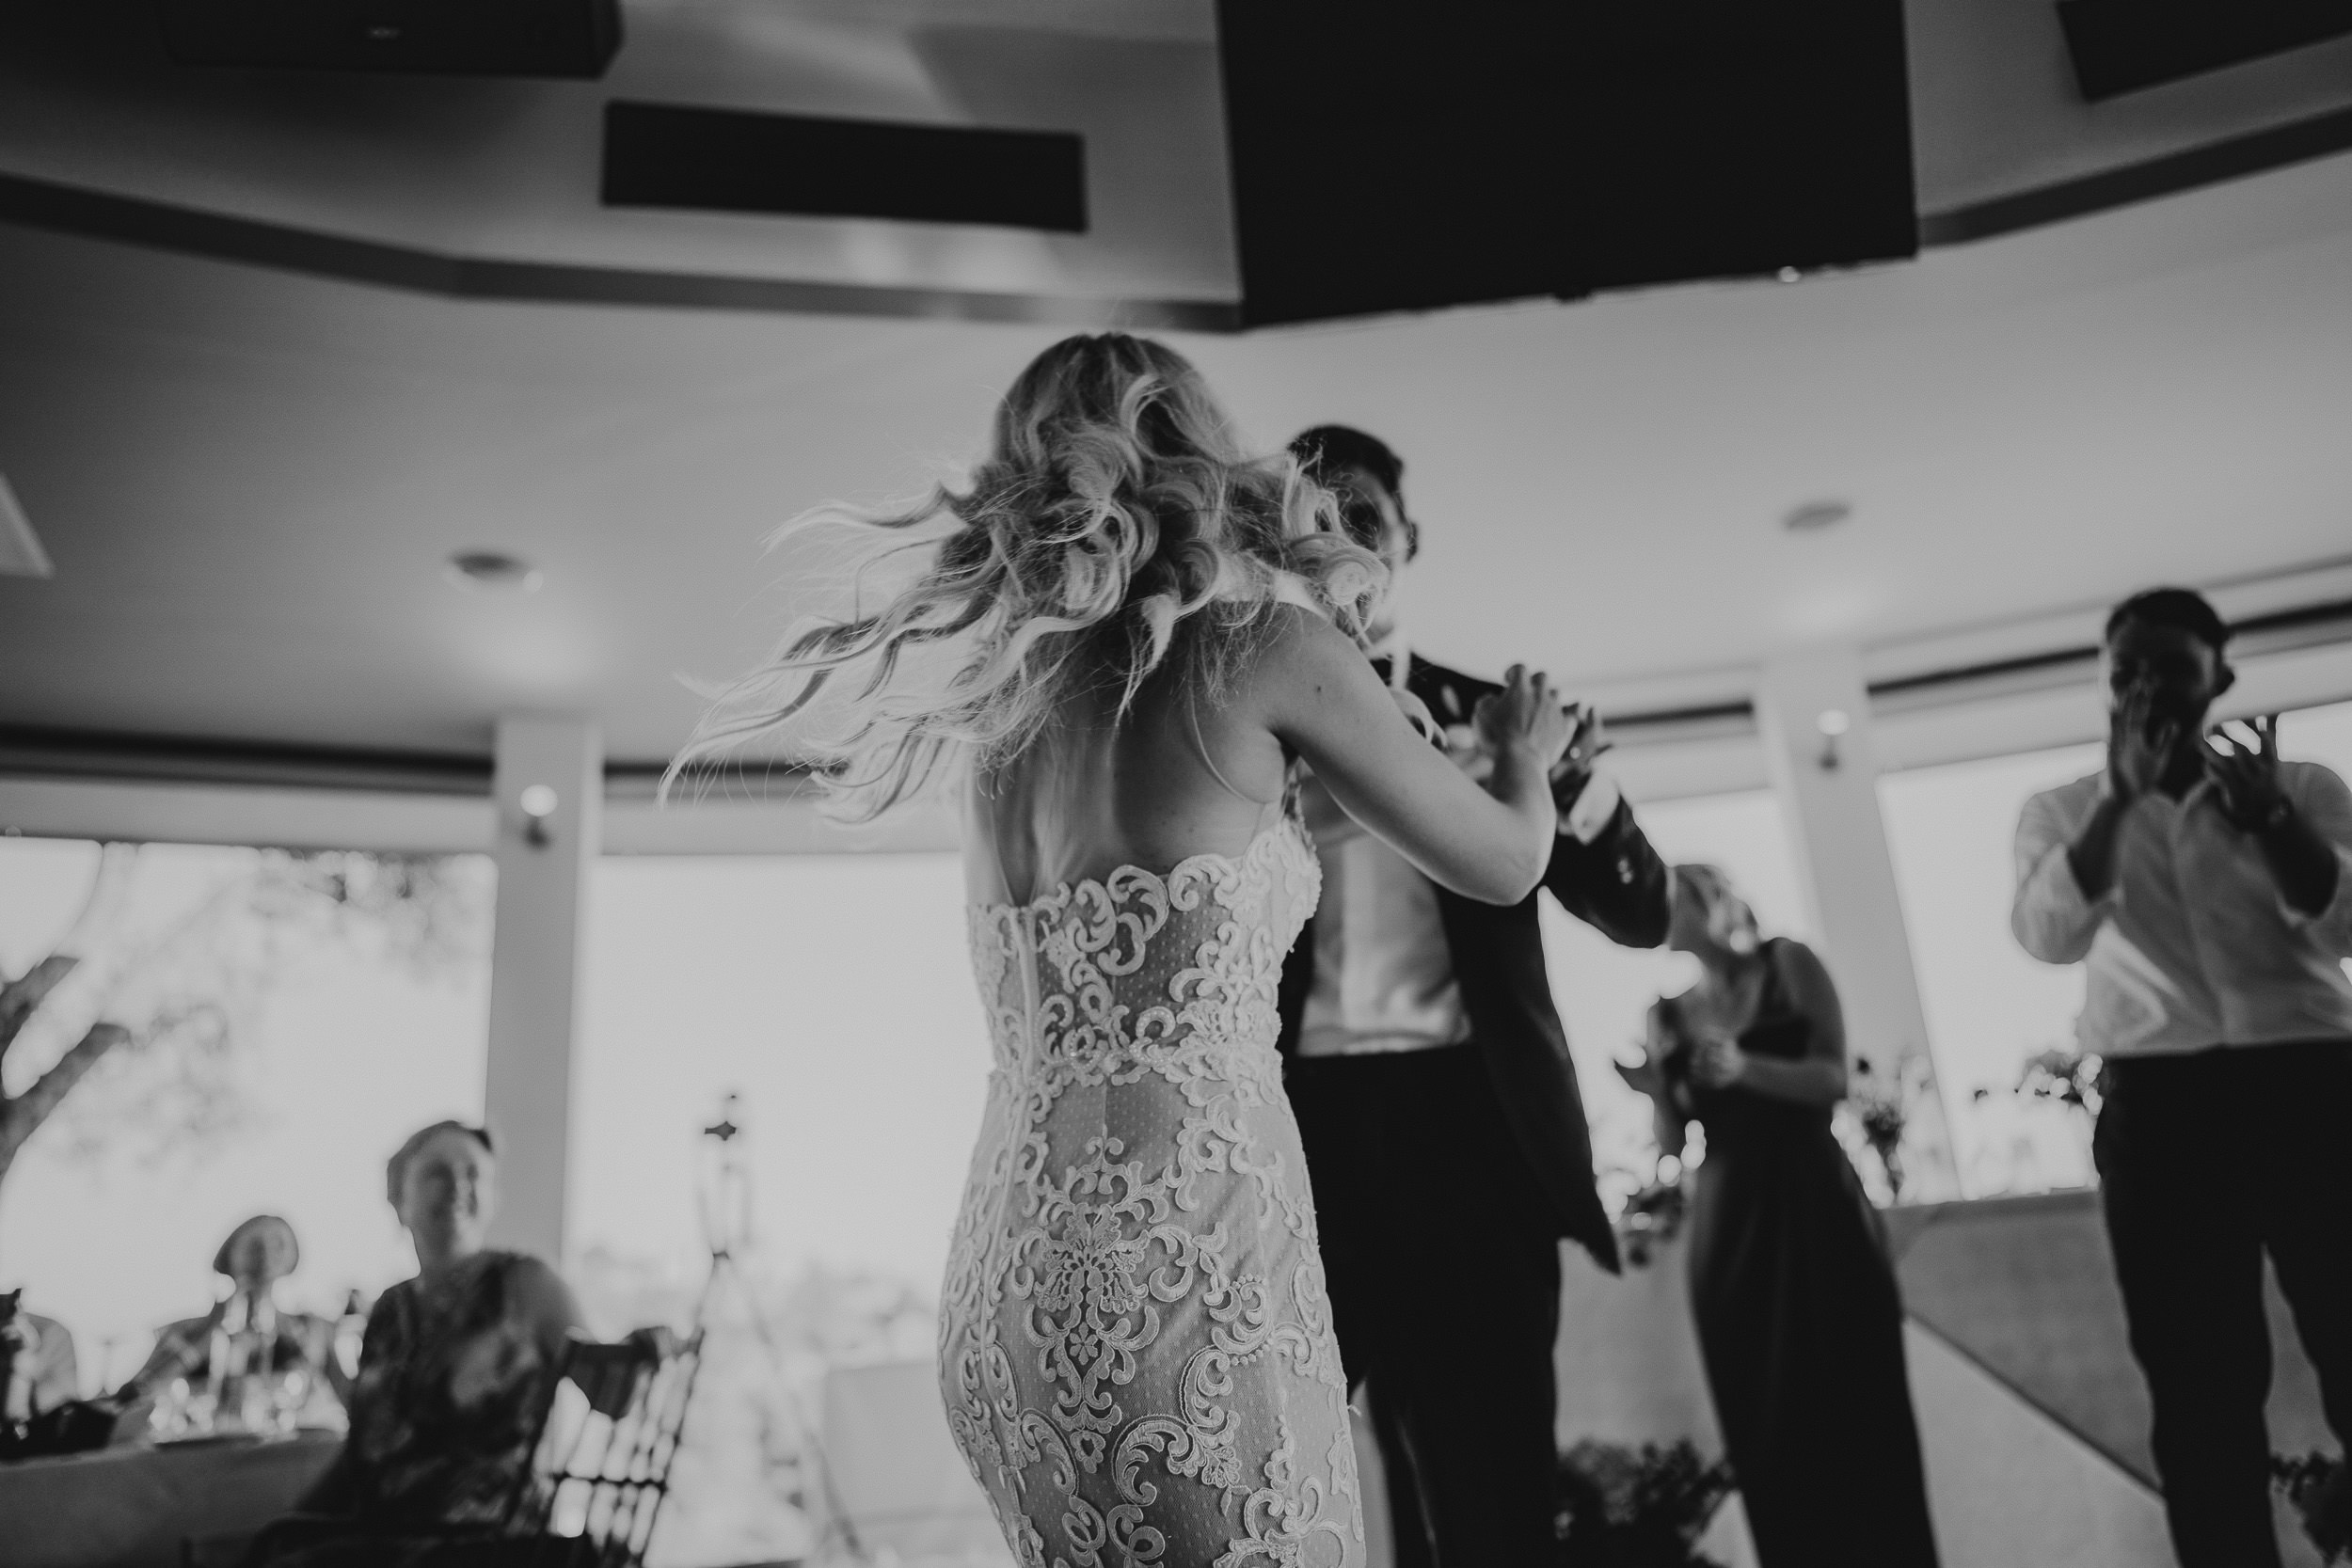 A bride and groom captured by their wedding photographer as they dance at their wedding reception